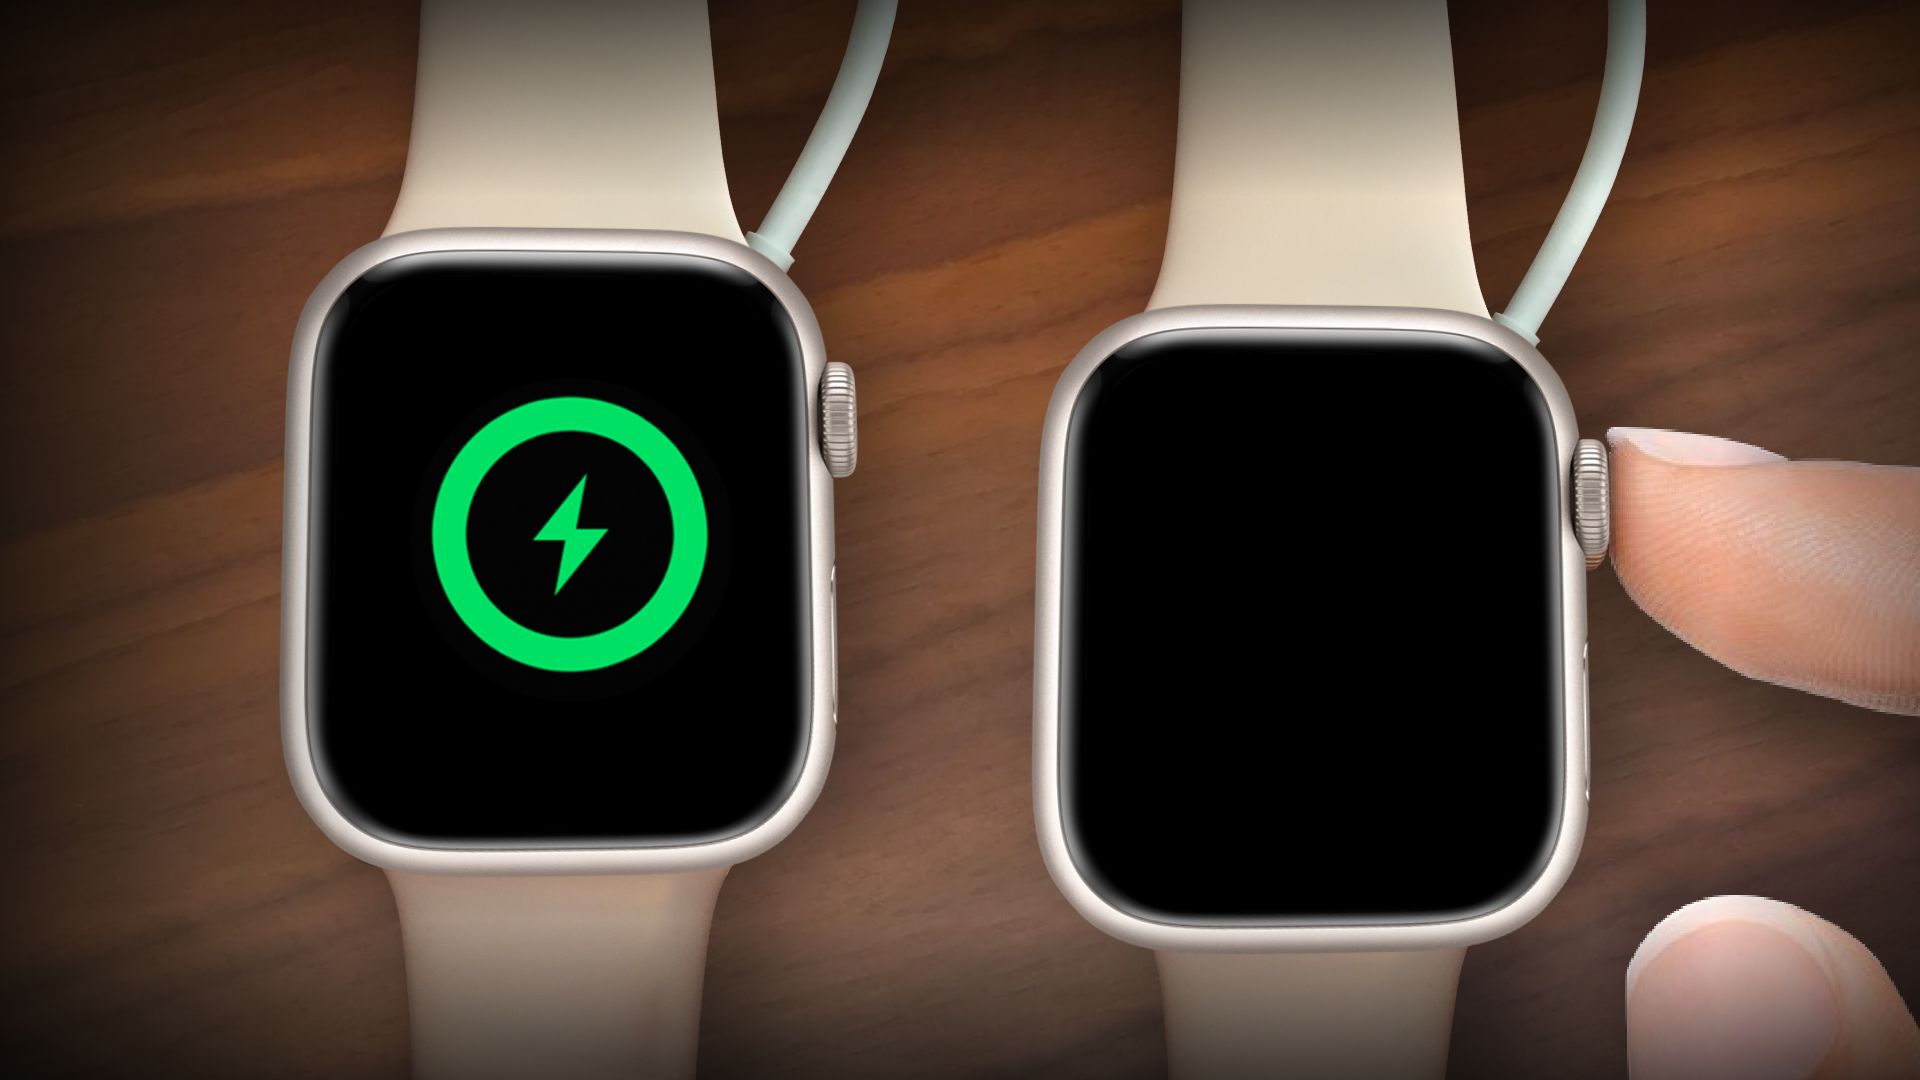 Step-by-step process on how to rest Apple Watch to unlock without an iPhone 01